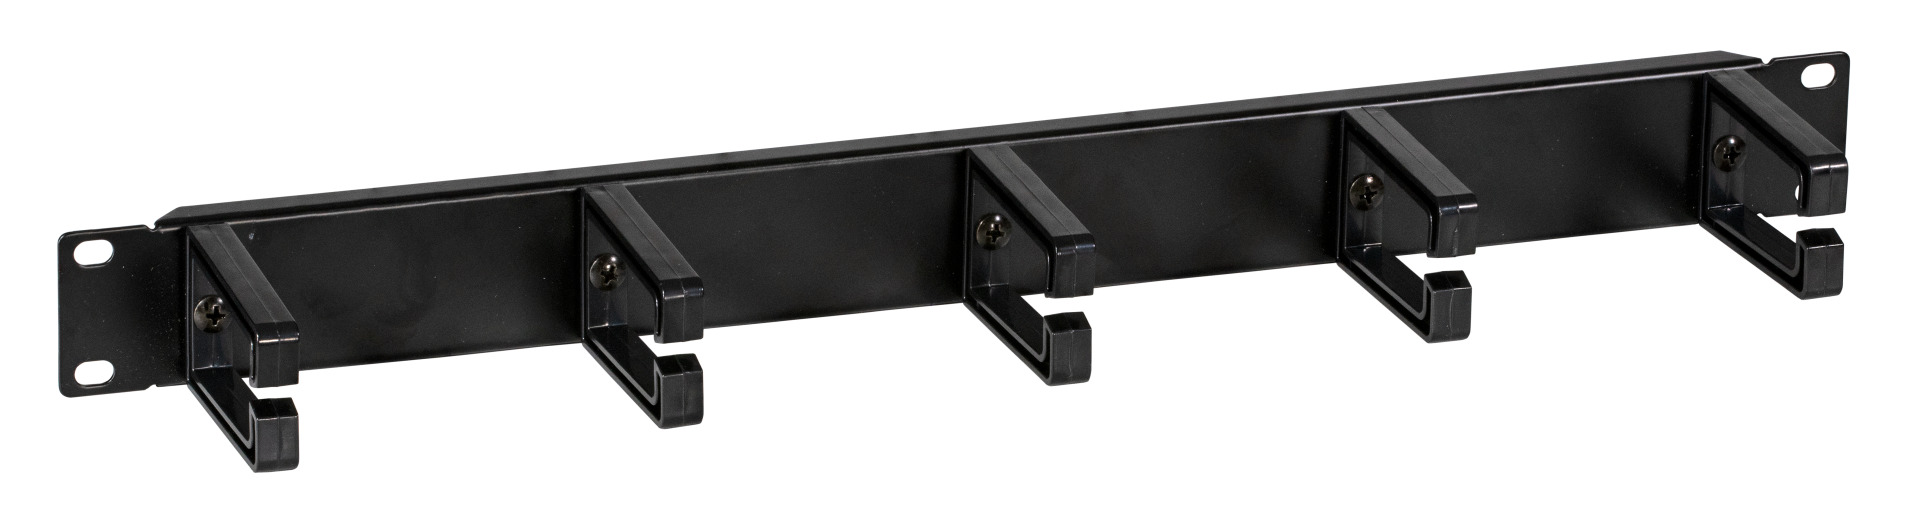 19" 1U Cable Routing Panel, 5 Brackets, Plastic RAL9005